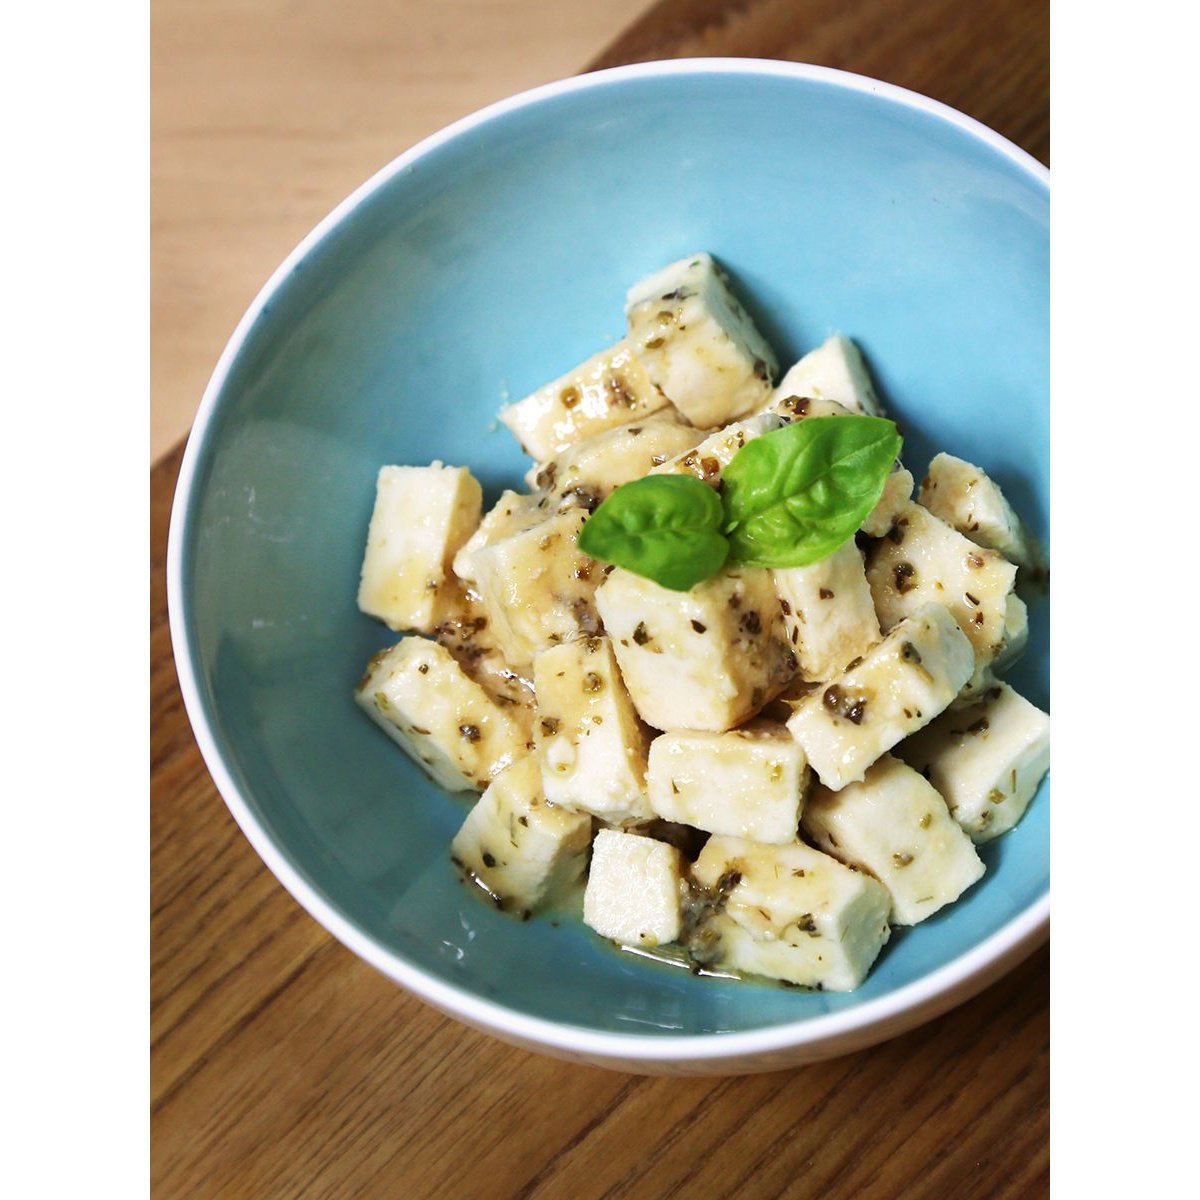 Marinated Feta, Made with the Vegan Cheese Kit from Mad Millie